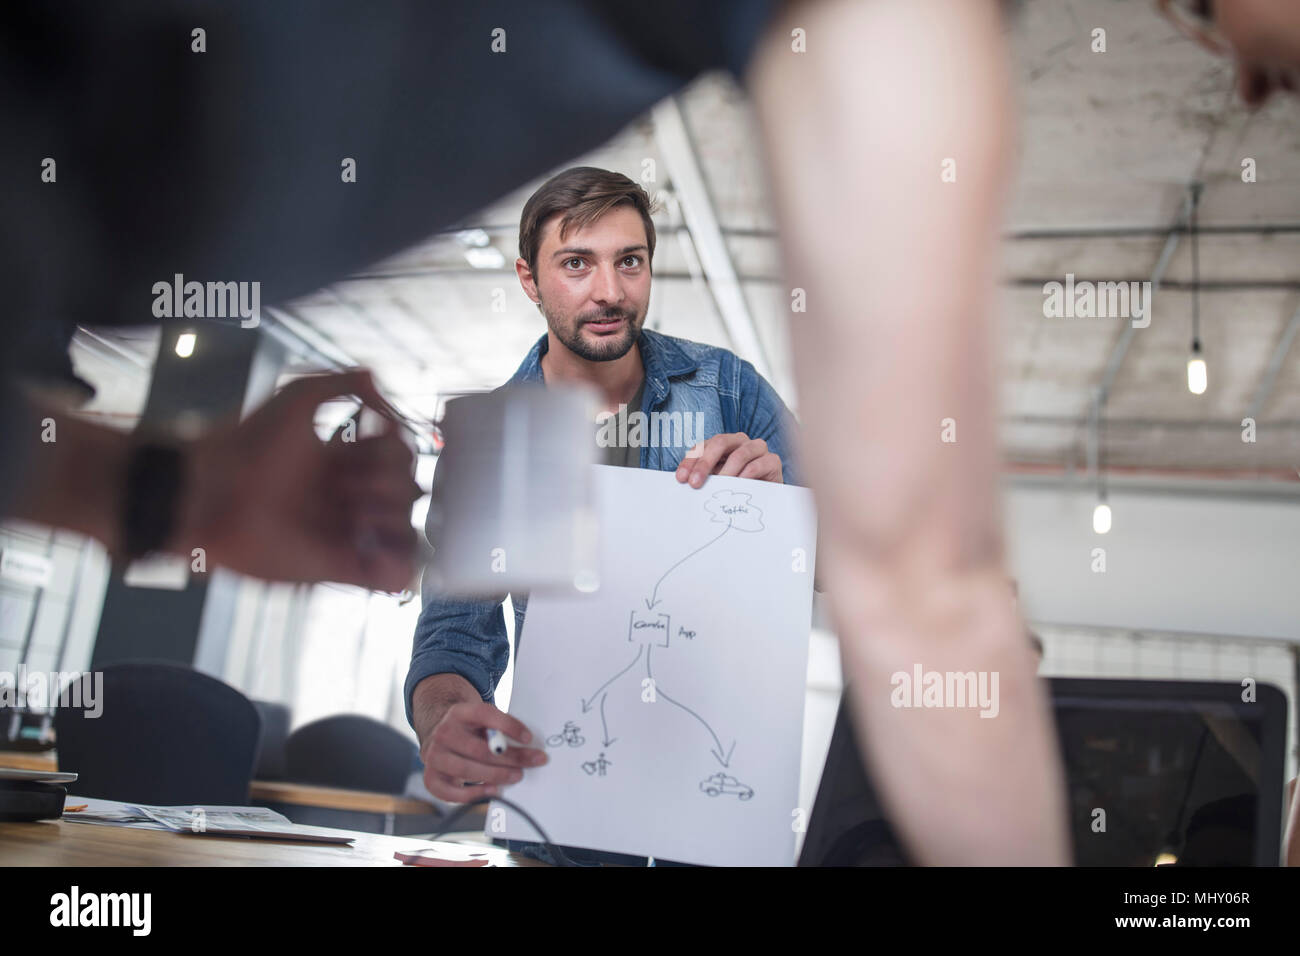 Young man discussing diagram with colleagues during office coffee break Stock Photo